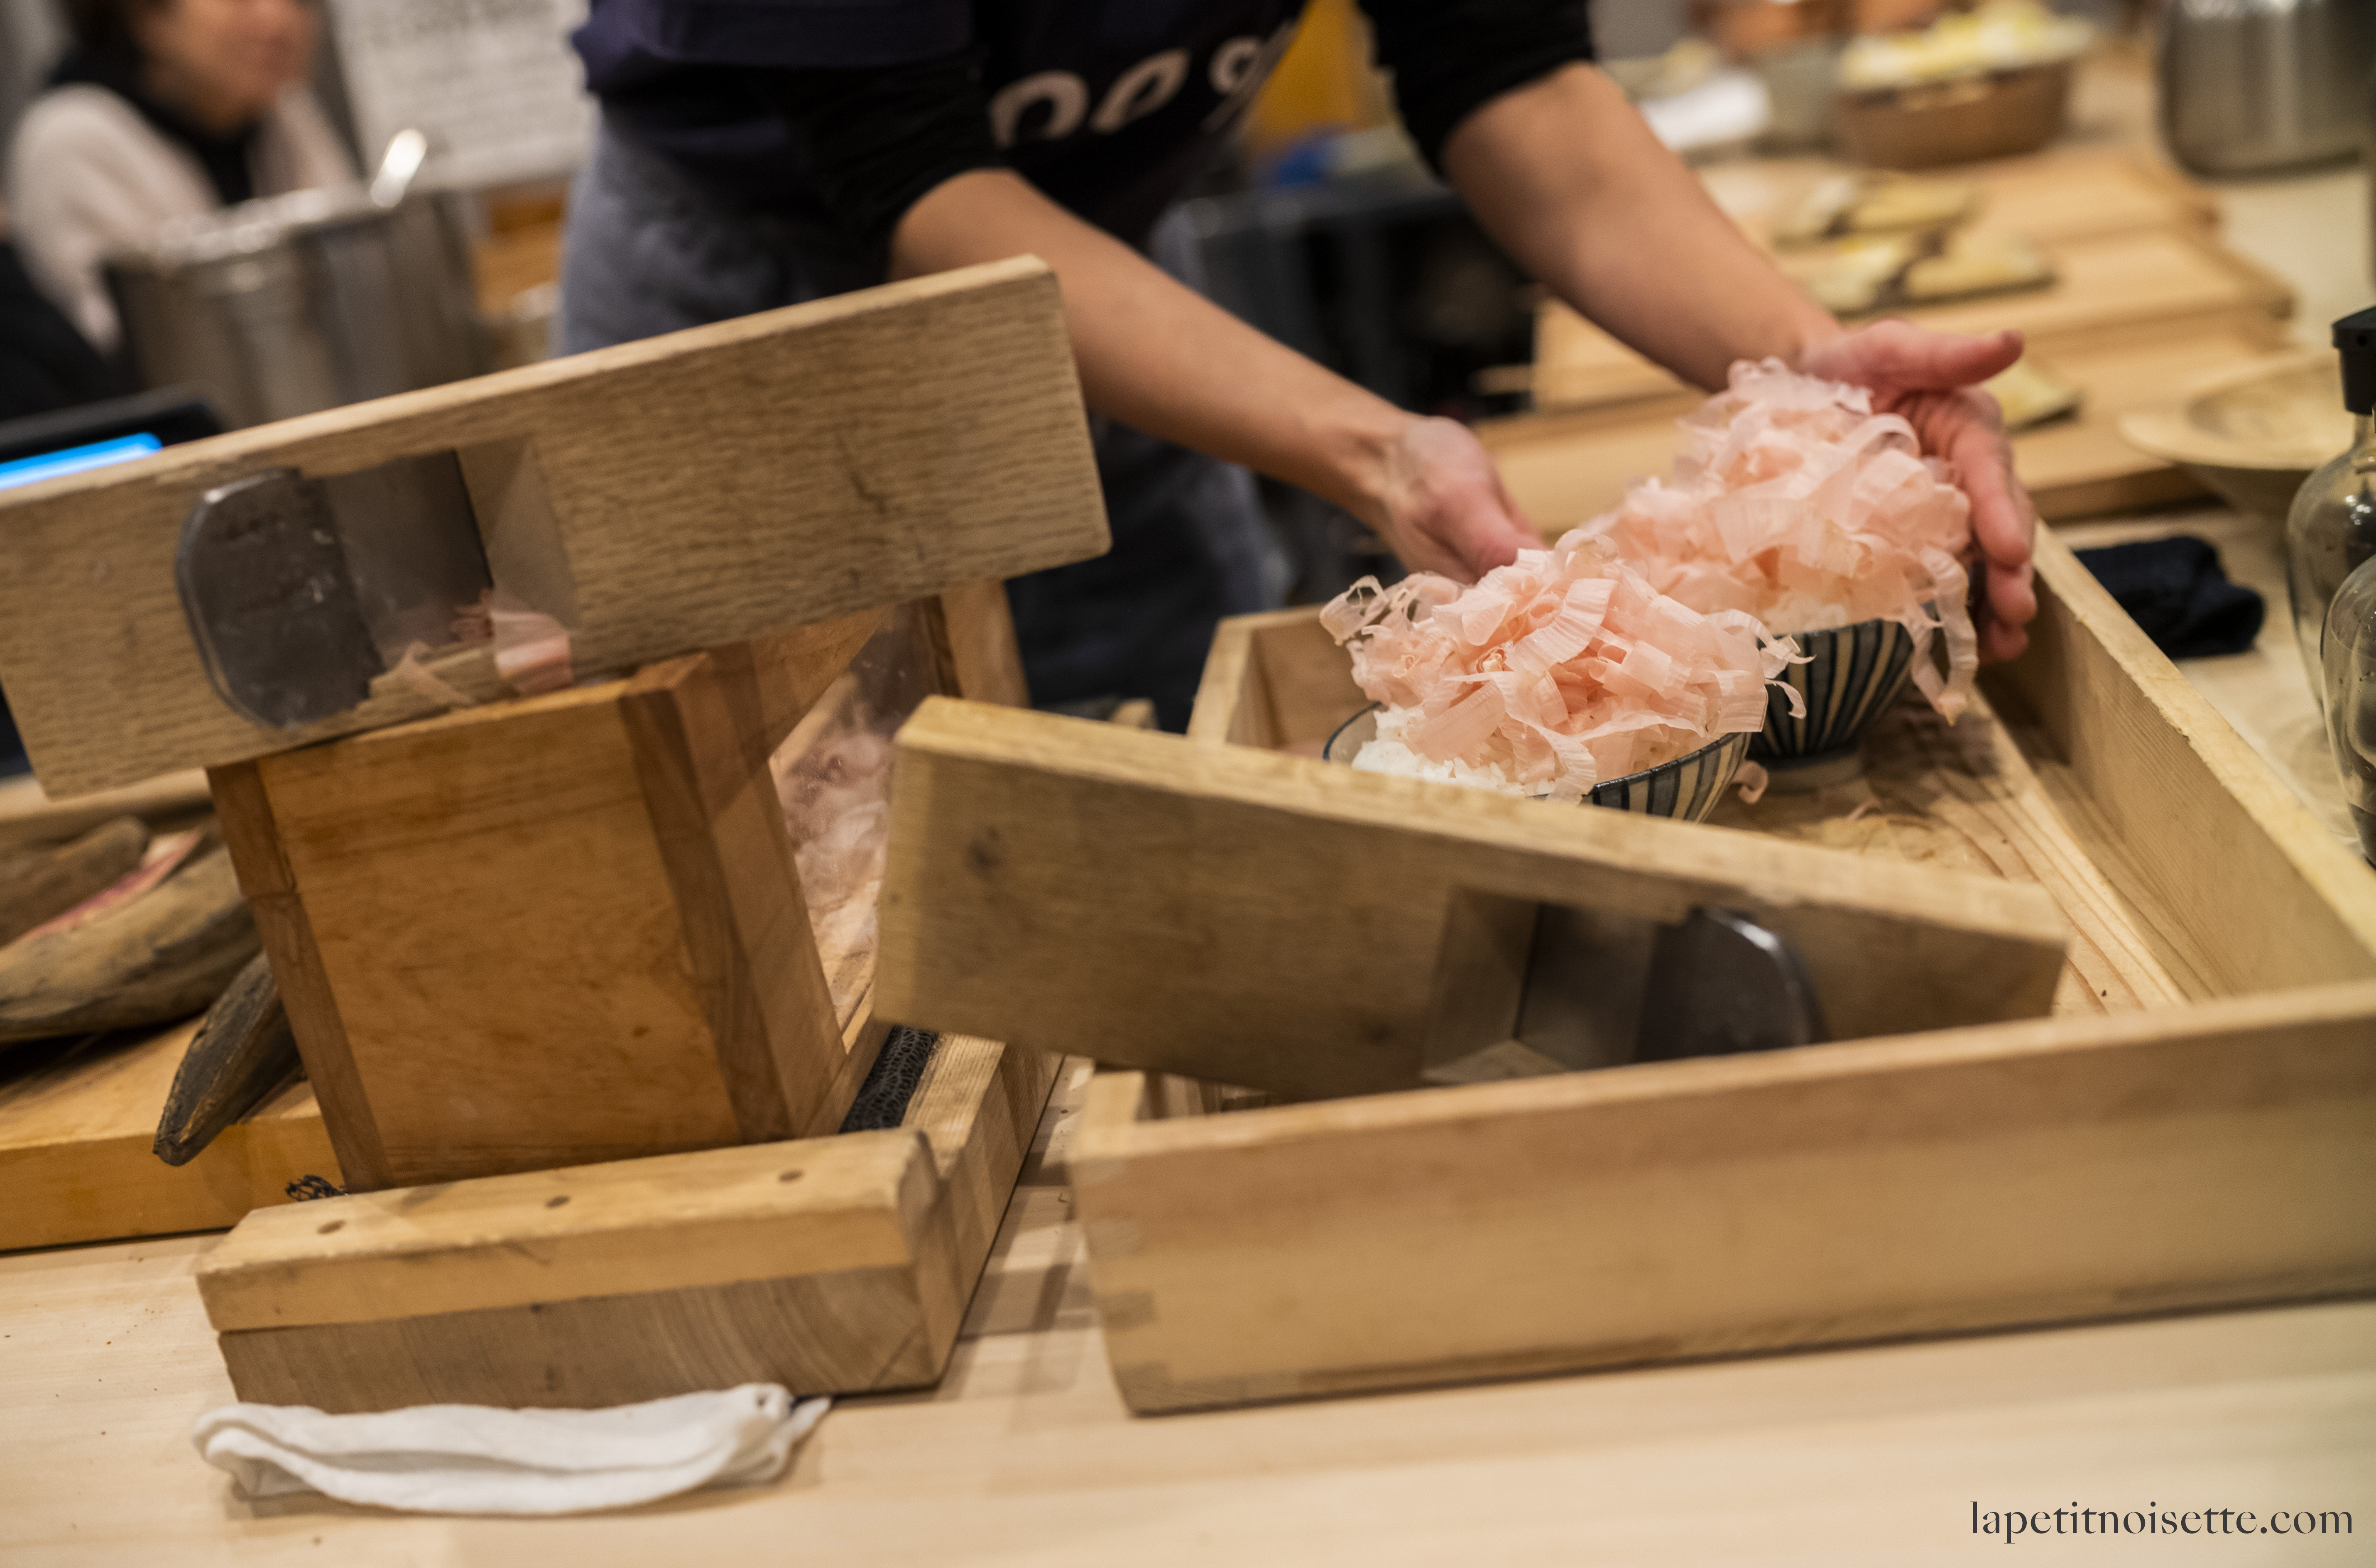 Fresh katsuobushi (鰹節) being shaved on rice for customers at a restaurant in Japan.